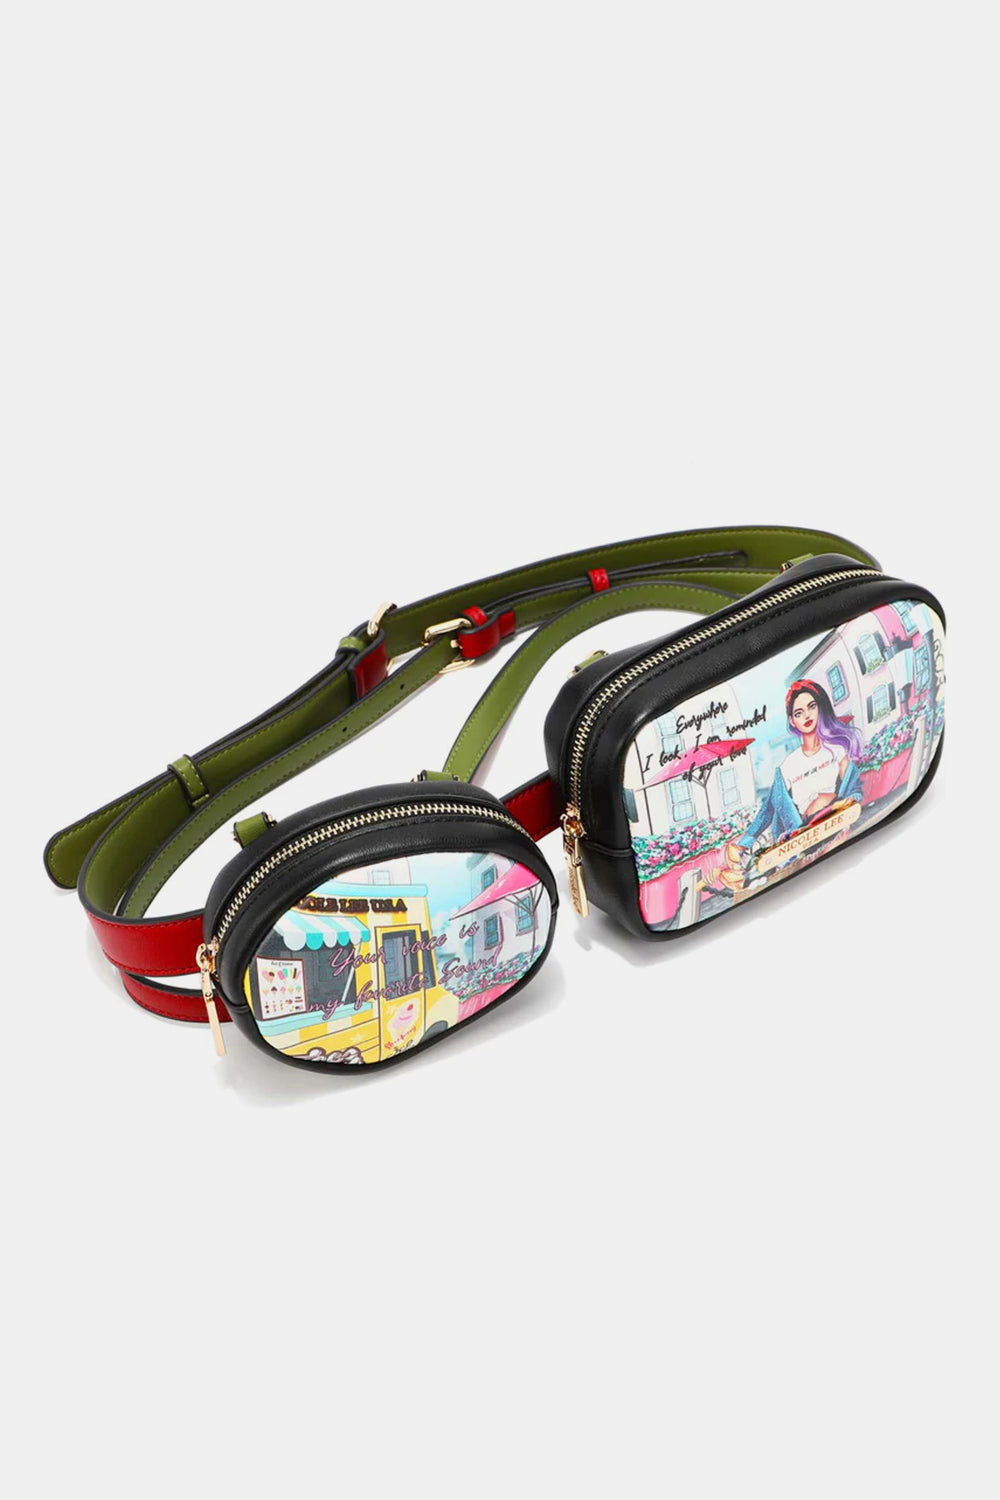 Nicole Lee USA Double Pouch Fanny Pack